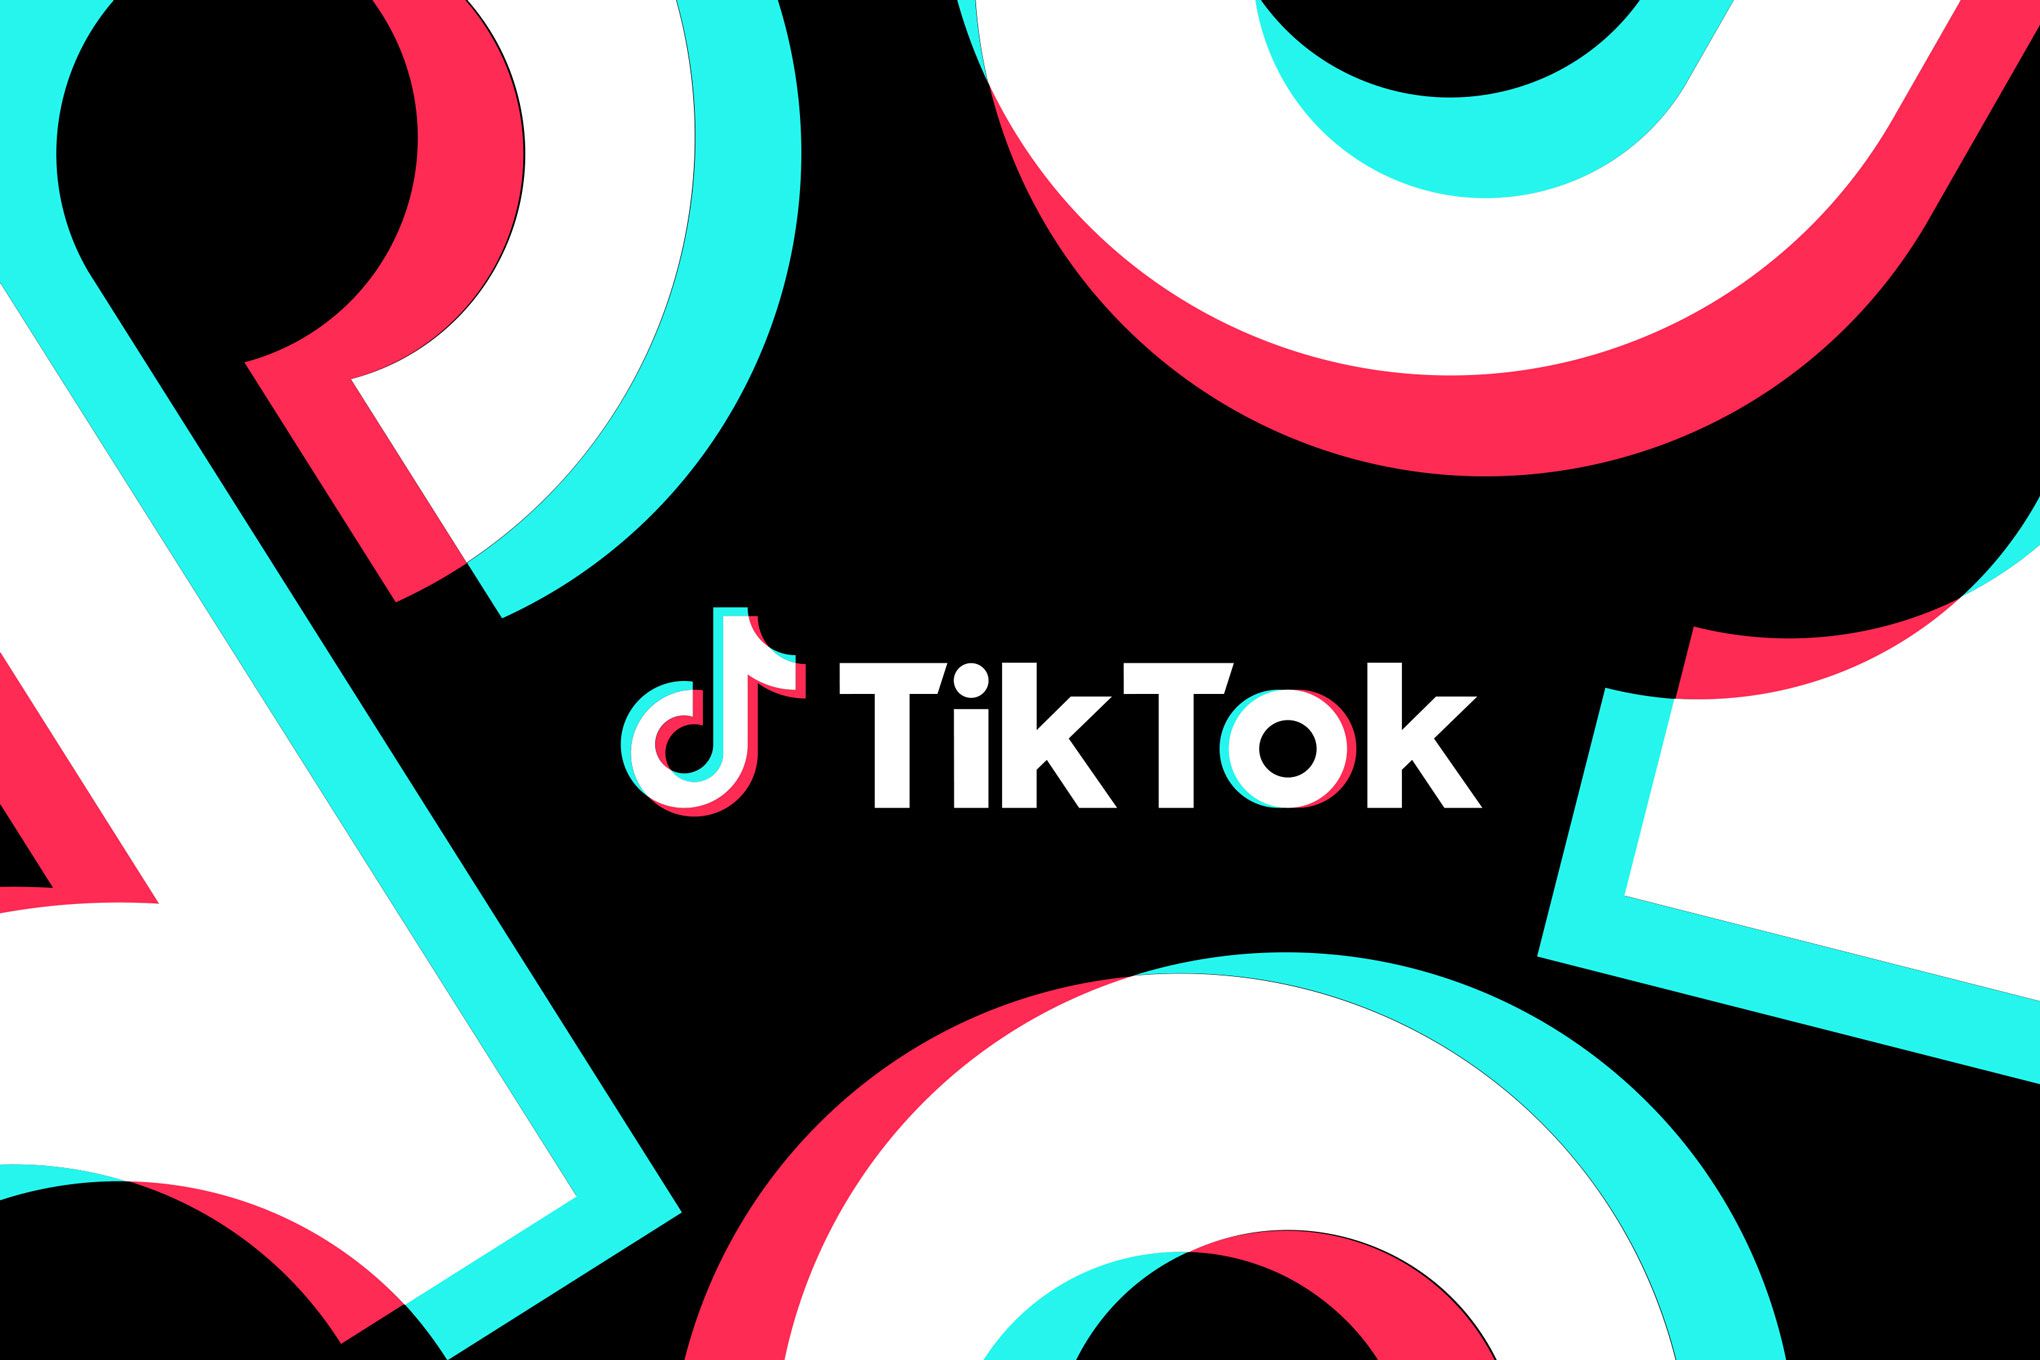 TikTok’s New Feature Allows Direct Posting From Adobe Apps, CapCut, Twitch, And More